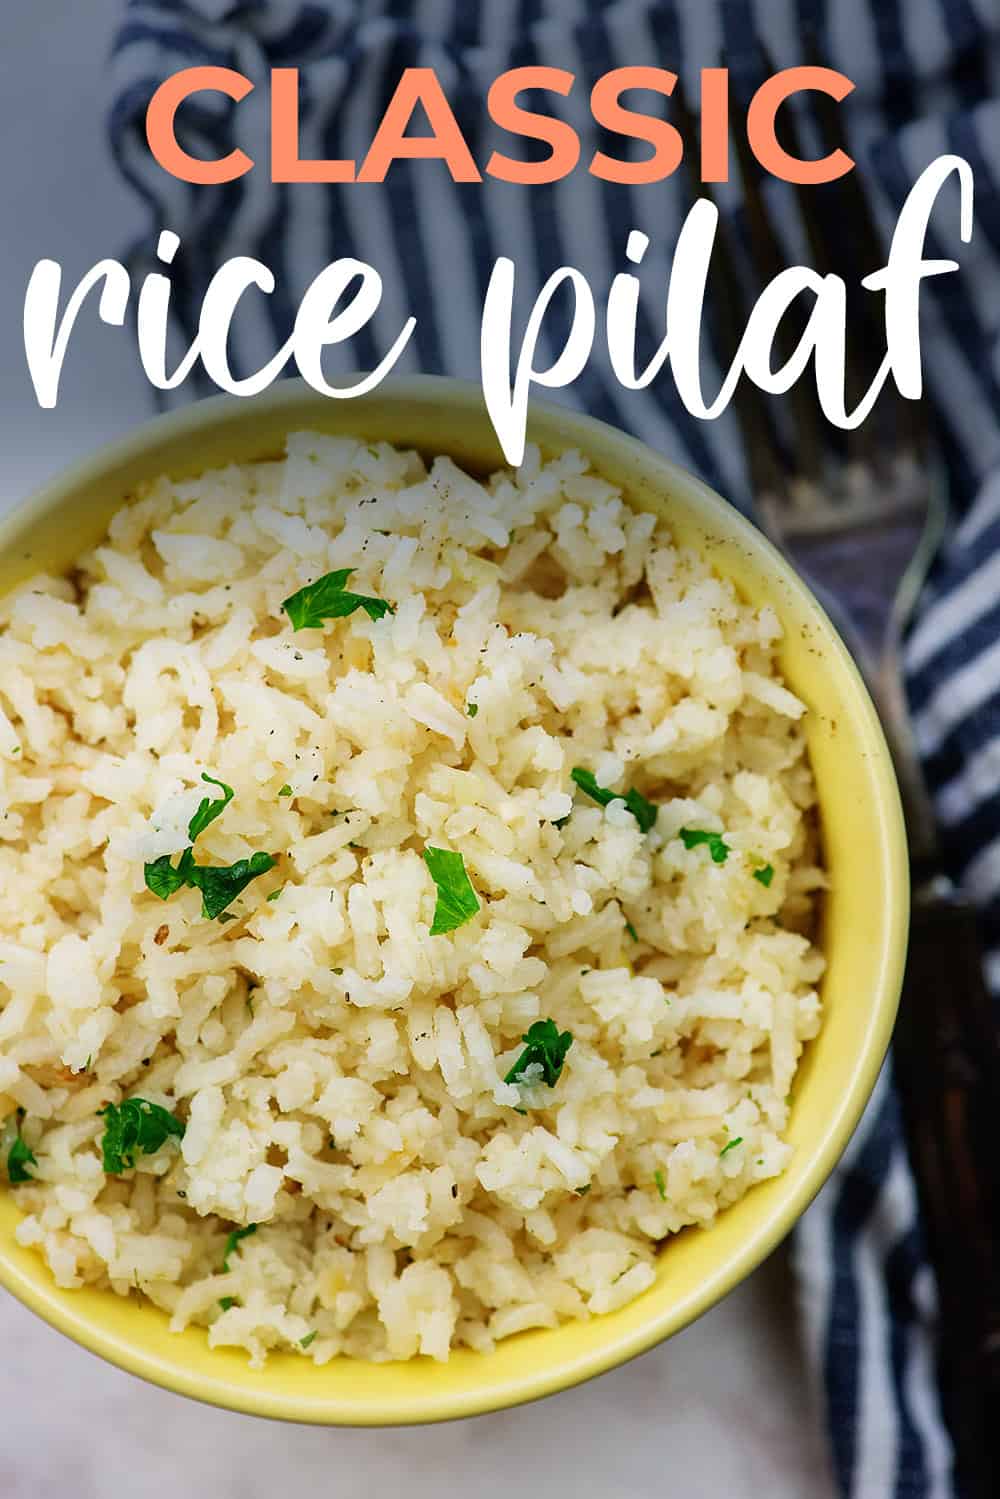 classic rice pilaf in yellow bowl.